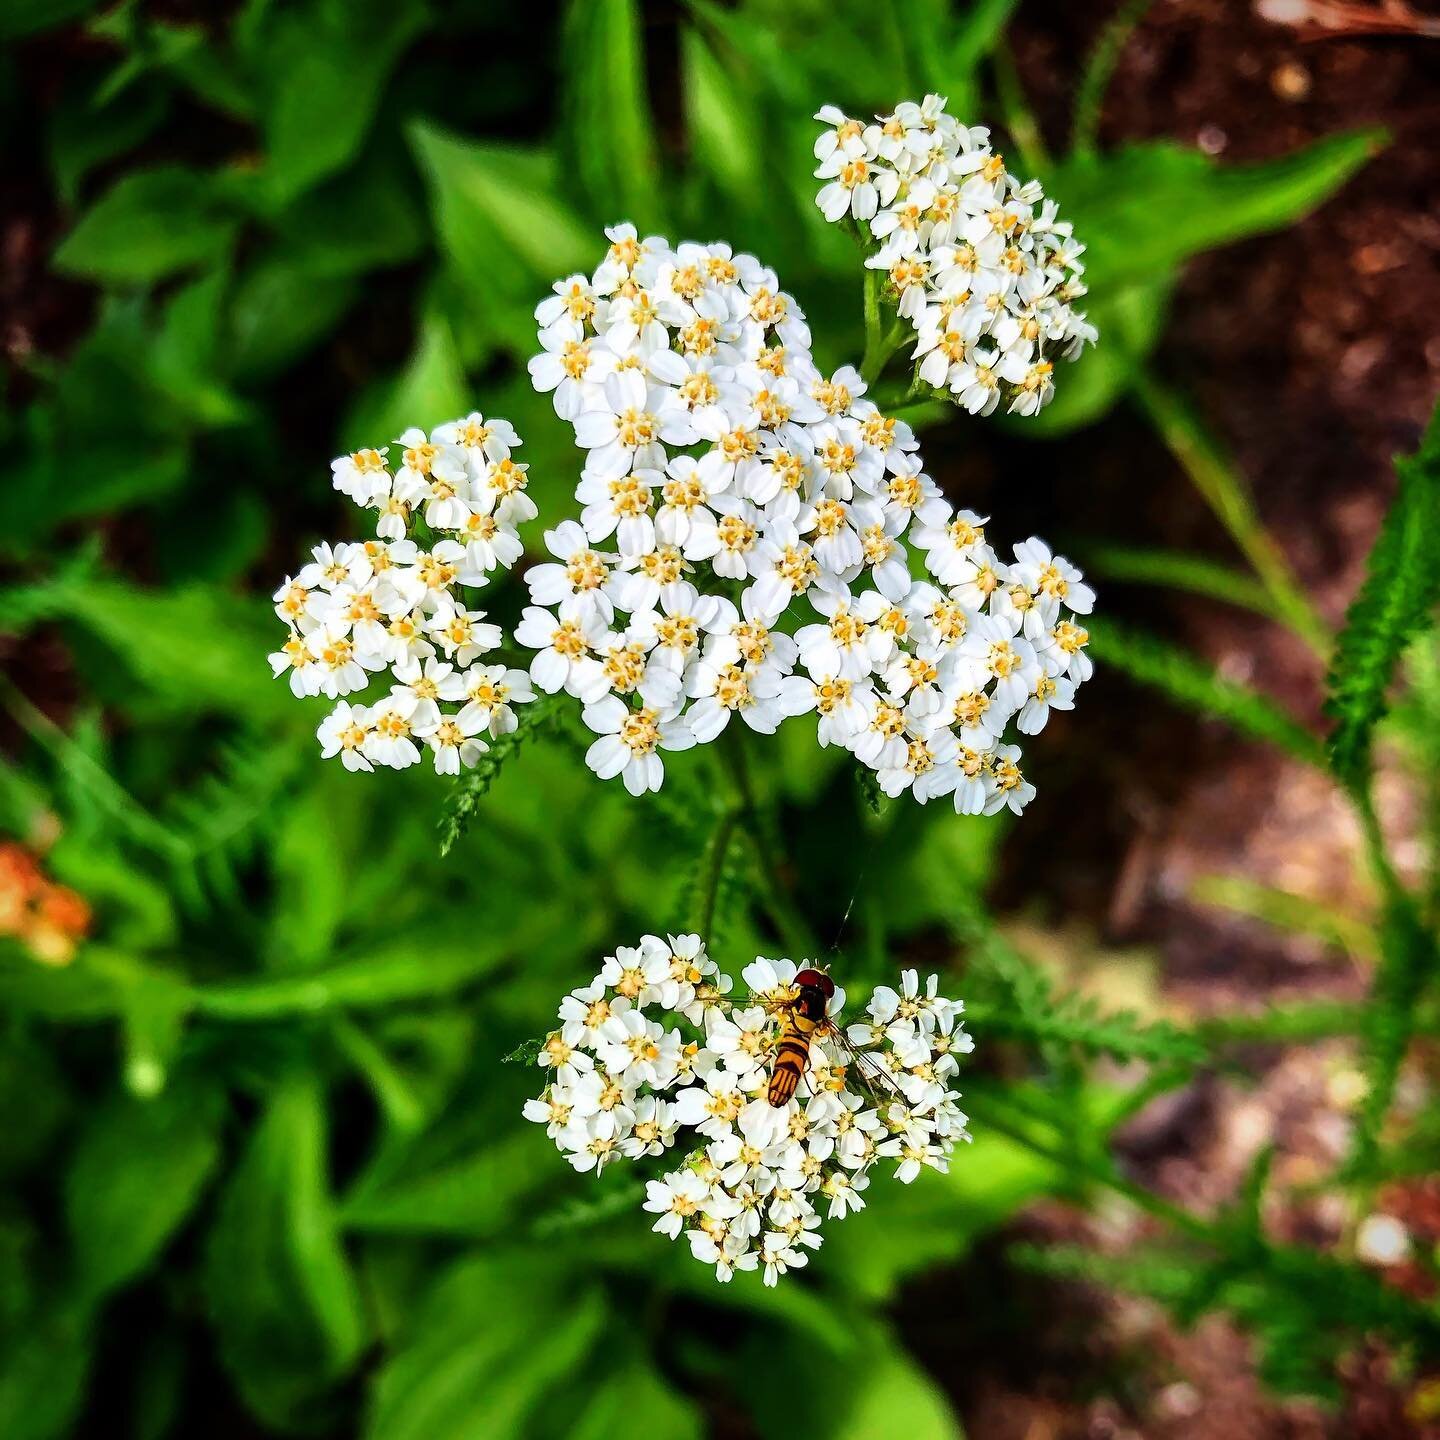 Yarrow, An Herb of Warriors and Wise Women podcast is now available on The Healthy Herb podcast, wherever you listen to podcasts. This is one of my all time favorite herbs. I ended up talking about it for an hour, which is the longest podcast of all 